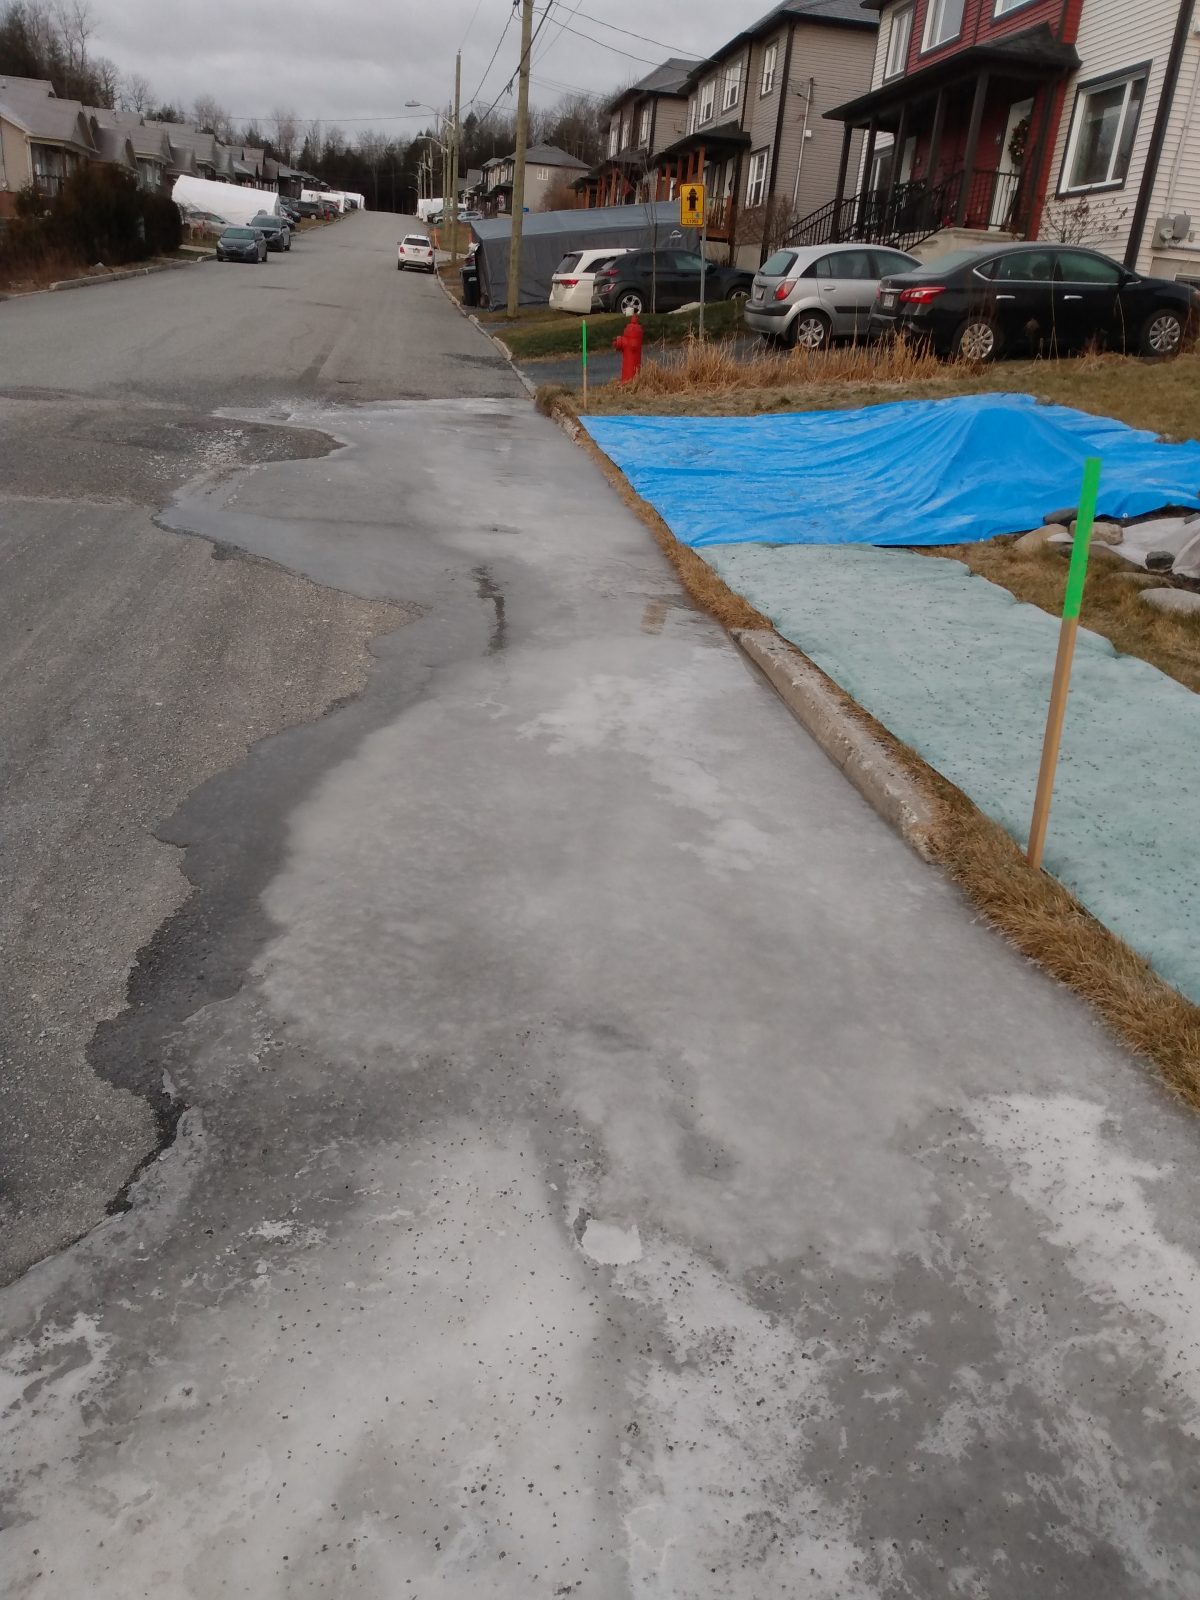 Residents of Lennoxville’s Mount Street seek municipal remedy to ice problem